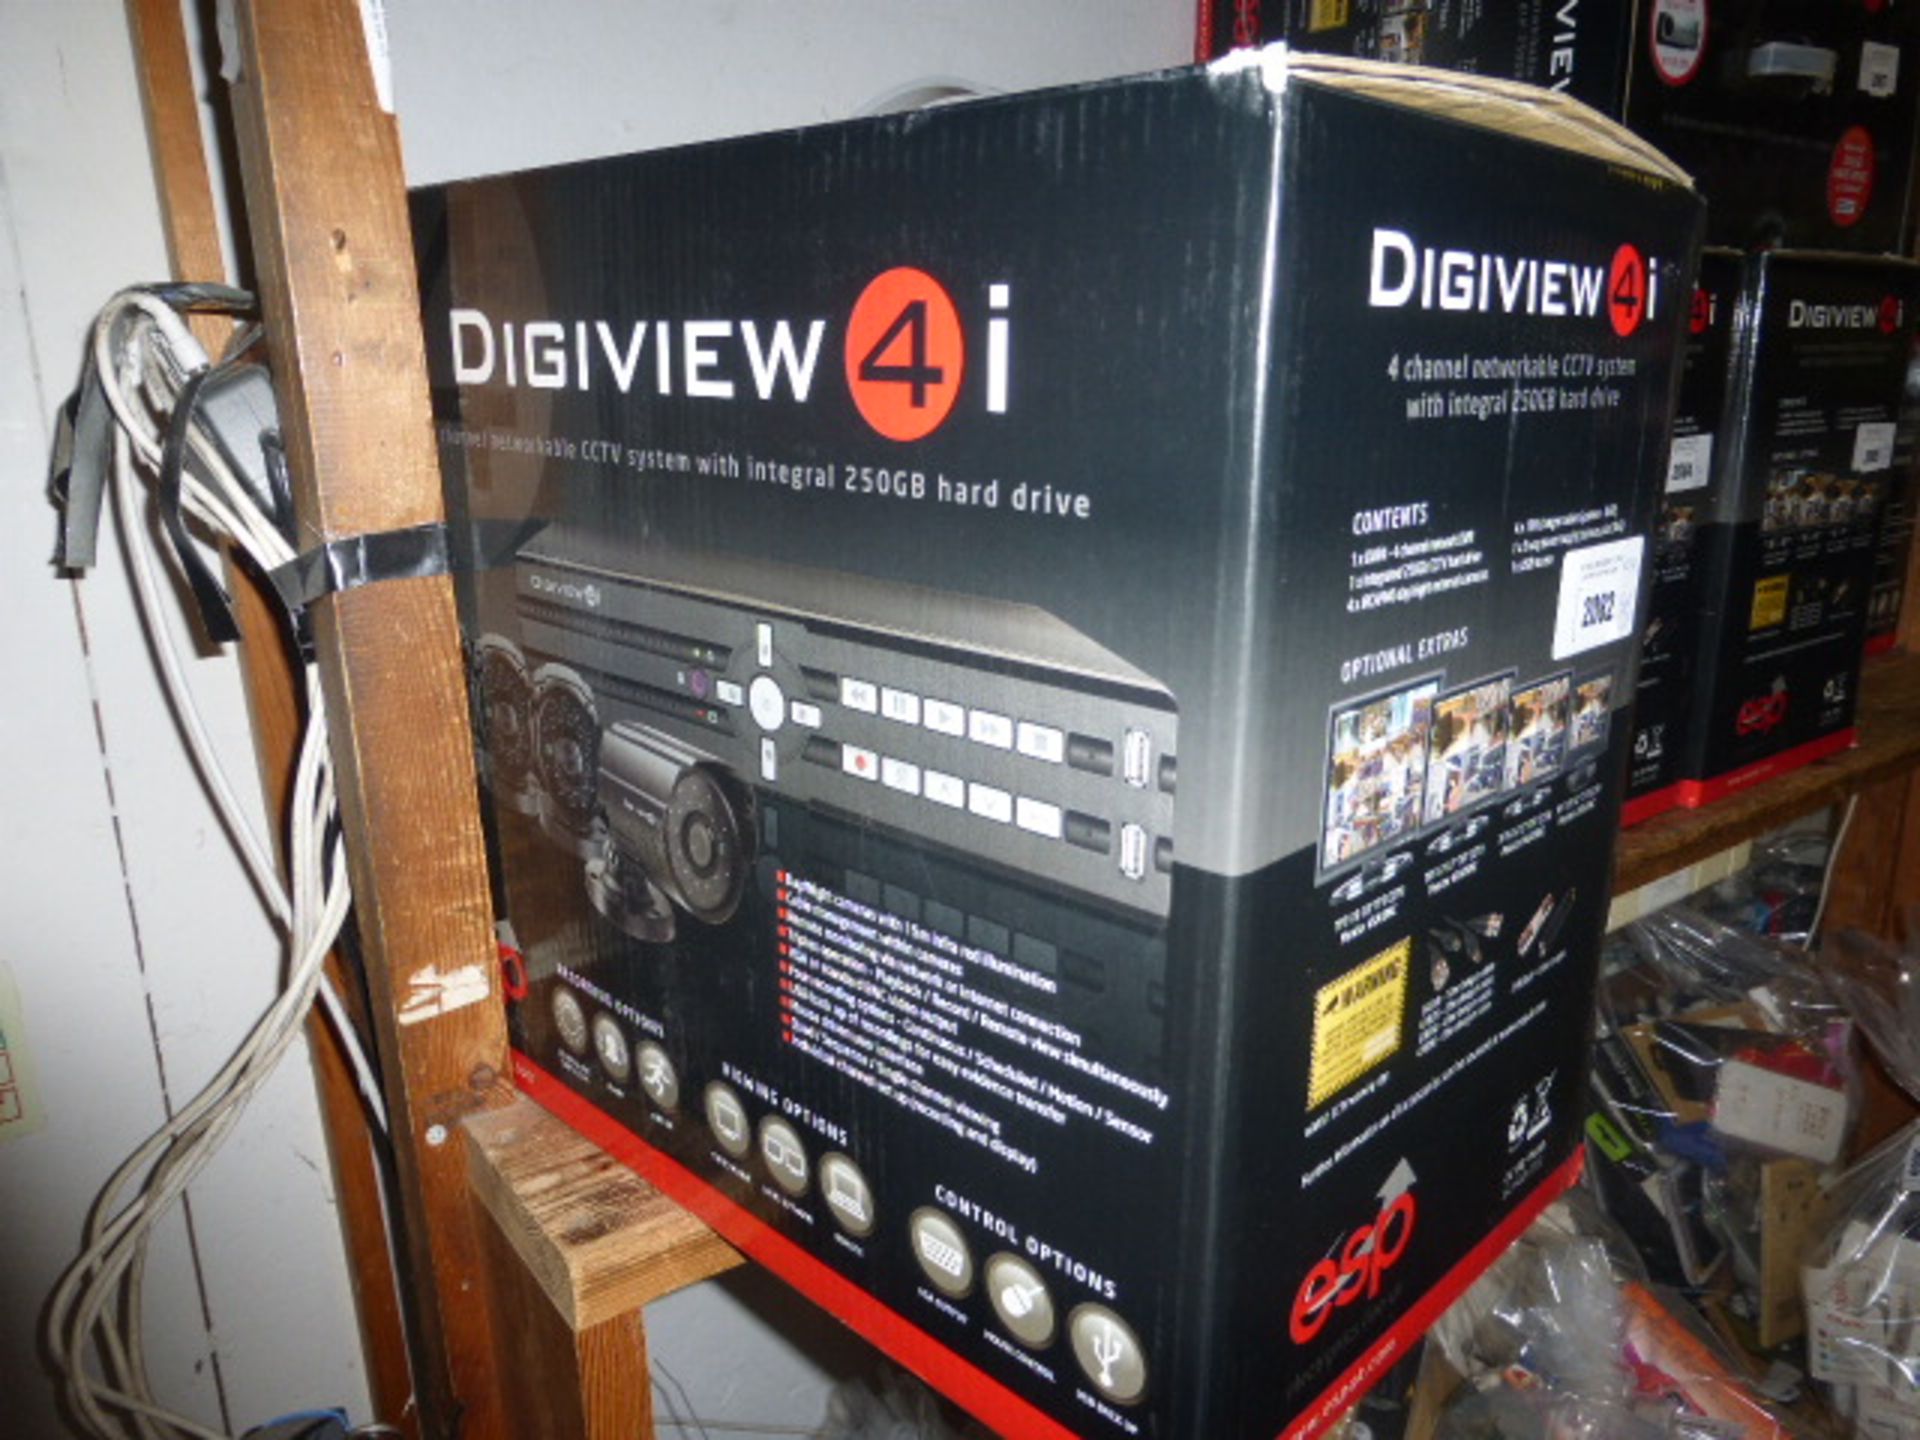 ESP Digiview 4i 4 channel networkable CCTV system with integral 500Gb hard drive in box